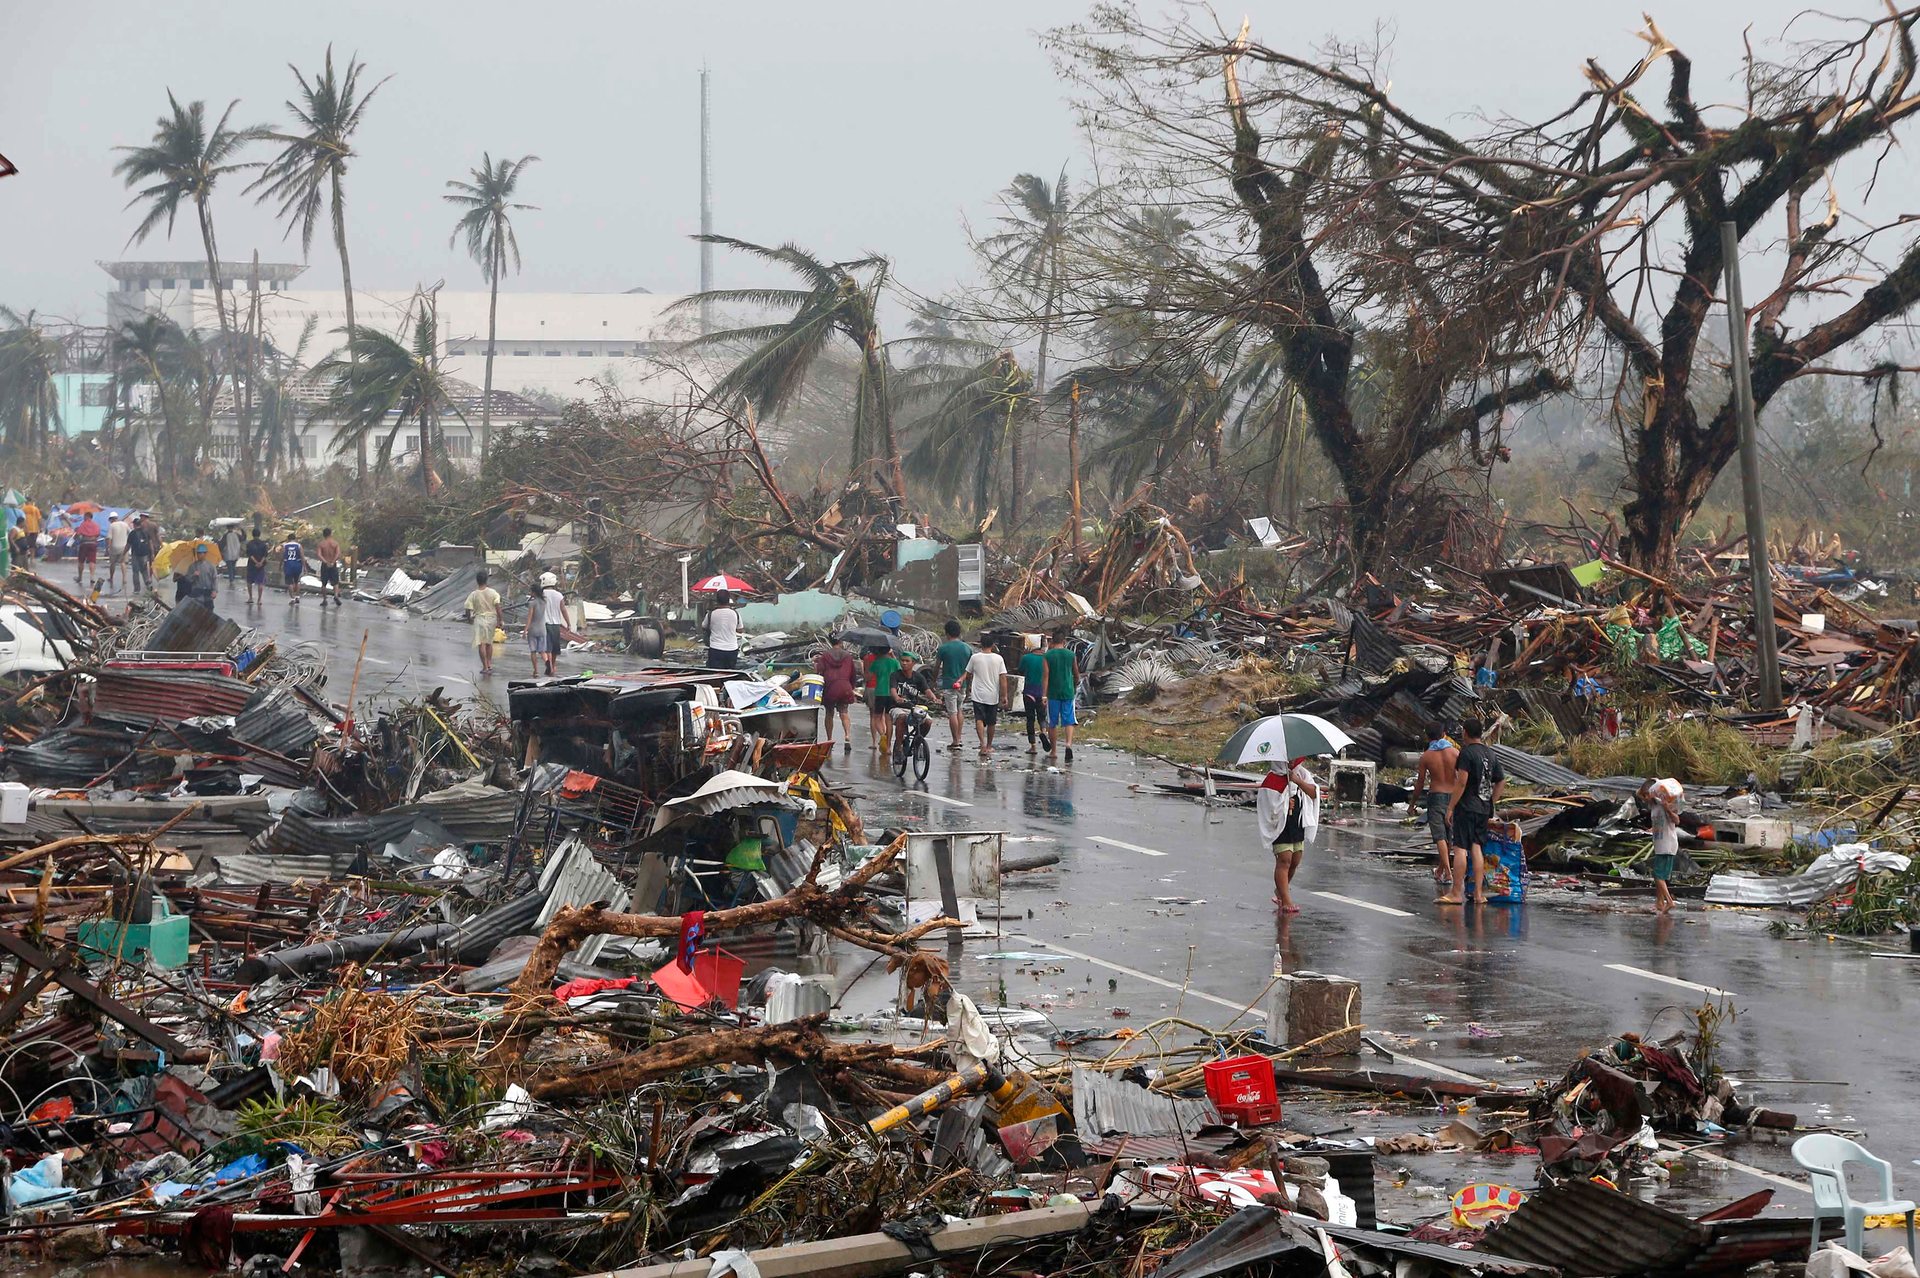 Typhoon Haiyan, known locally as Yolanda, struck in 2013 and was one of the most powerful storms ever recorded. Photograph: Erik de Castro / Reuters/REUTERS